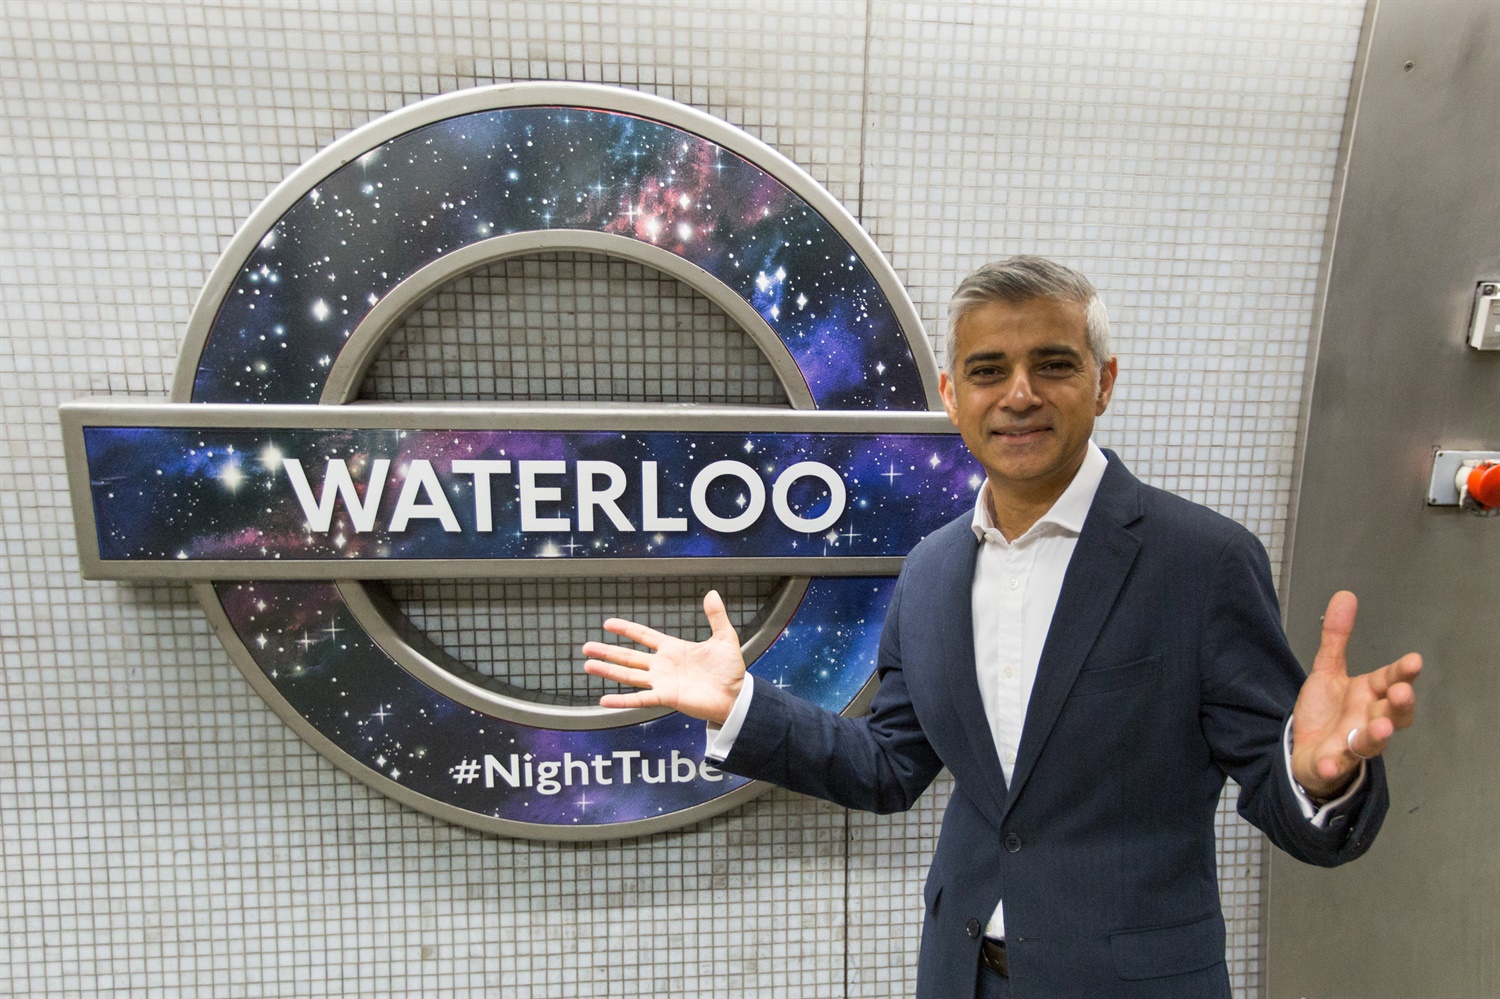 Night Tube to launch on Northern Line in November